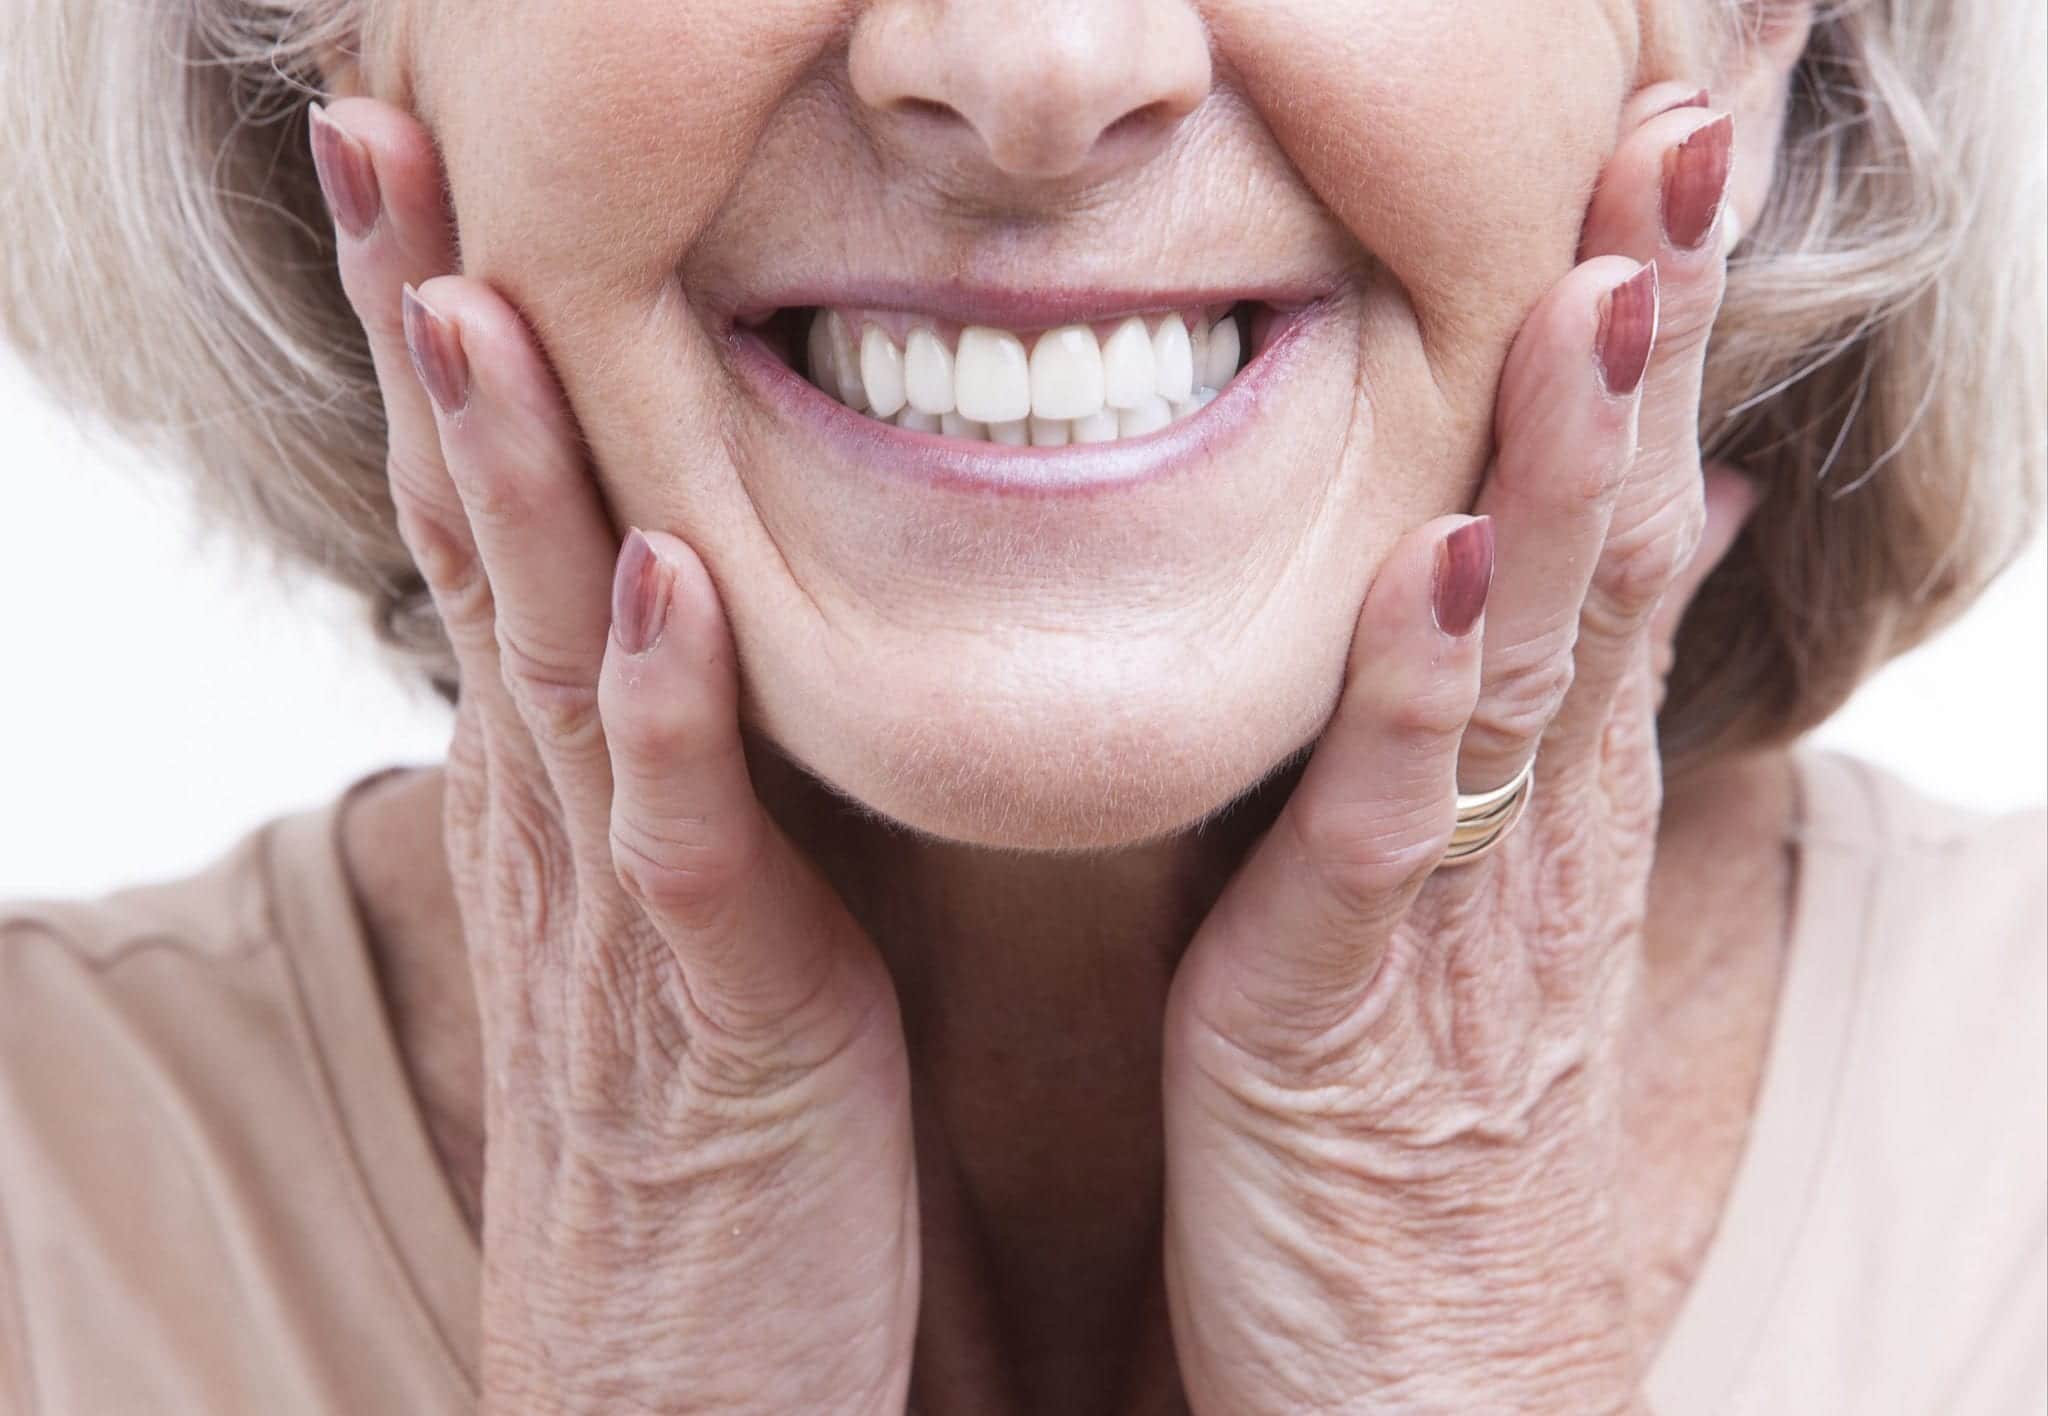 South Florida Denture Specialists